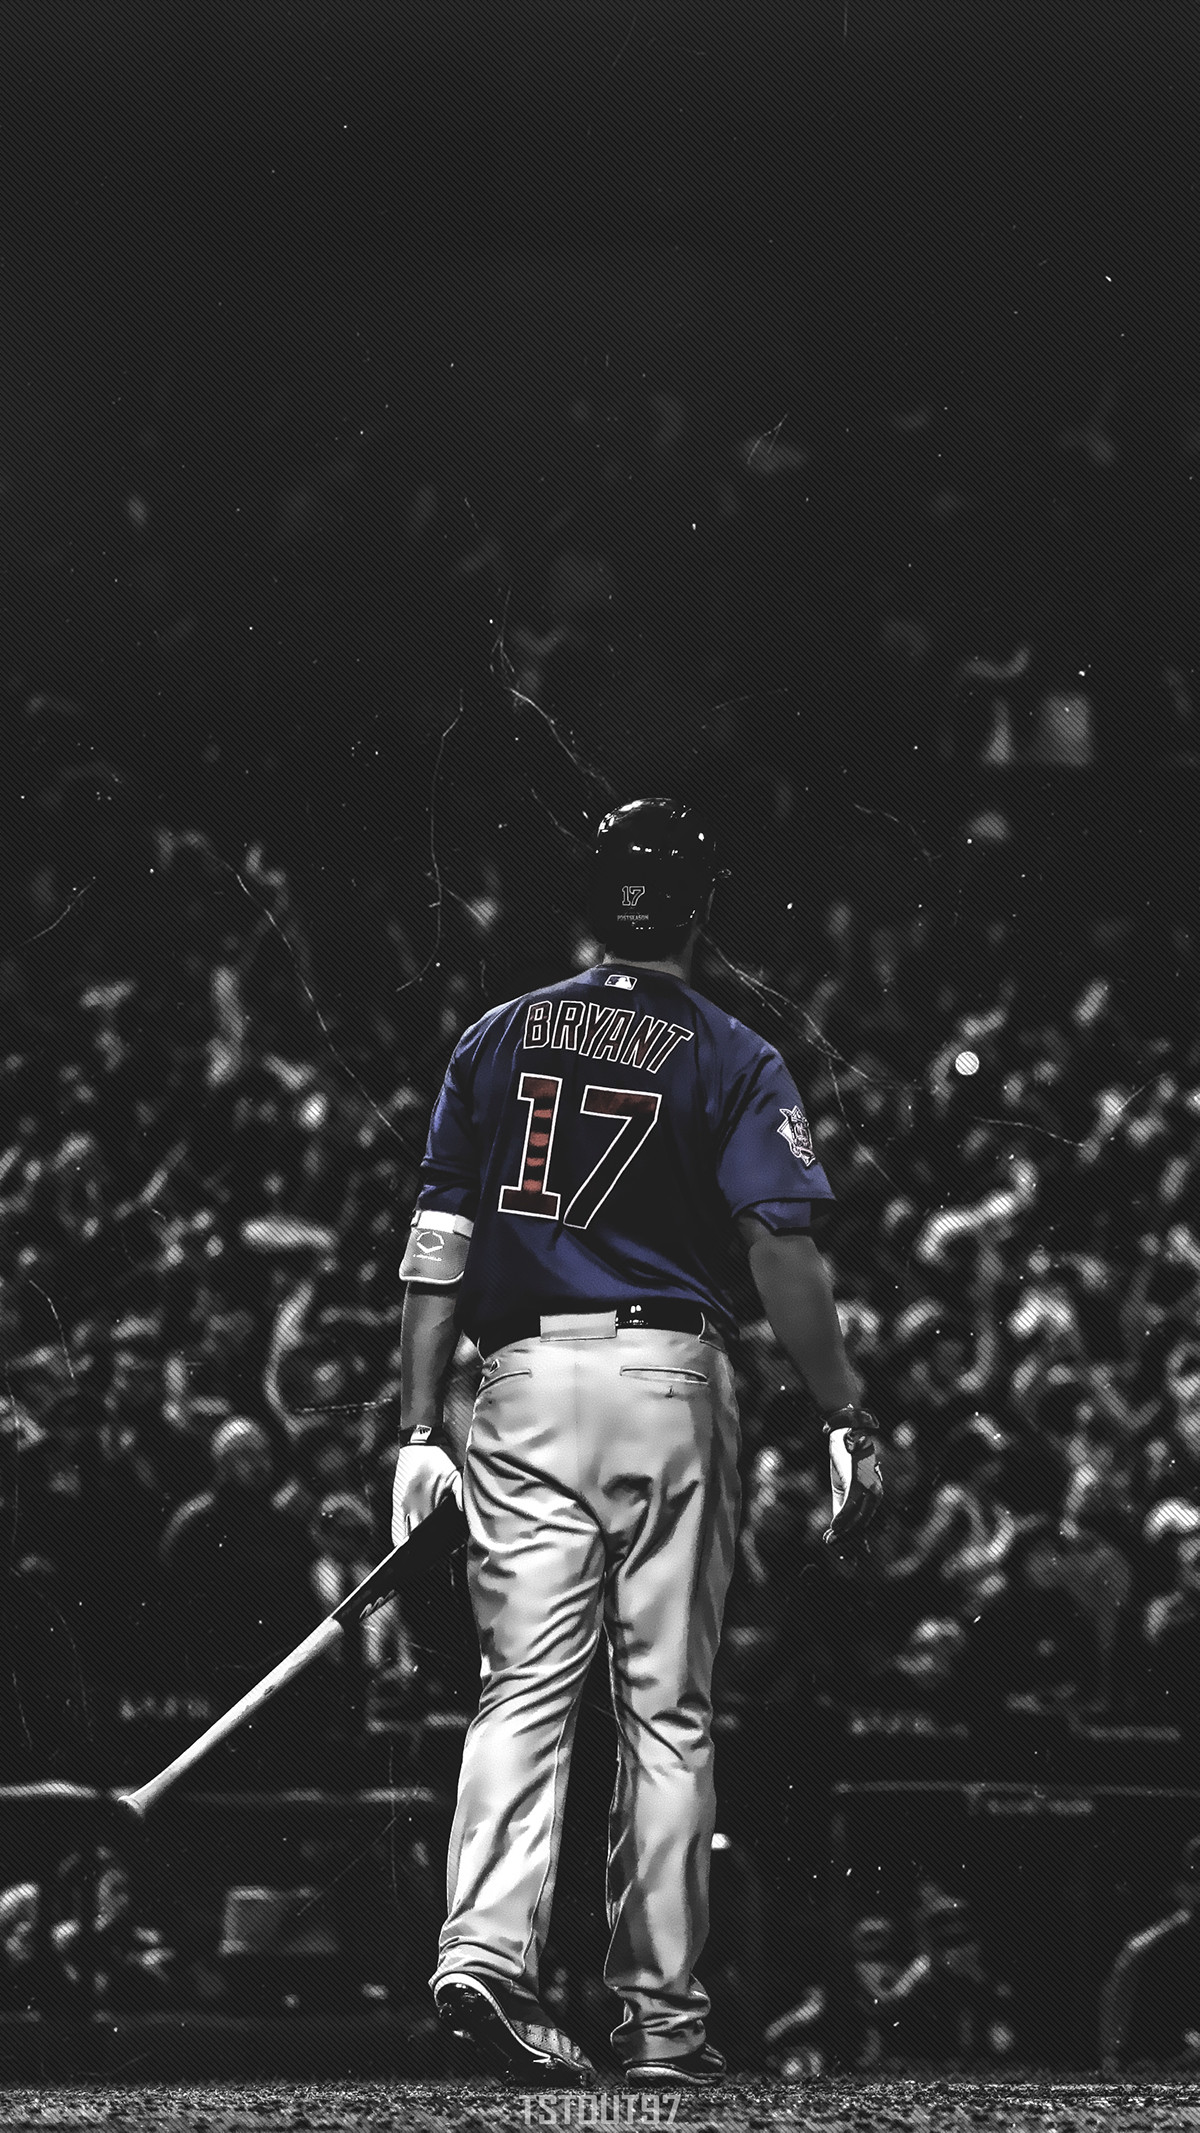 Chicago Cubs Wallpaper Collection For Free Download Kris Bryant Mobile Phone Wallpaper on Behance